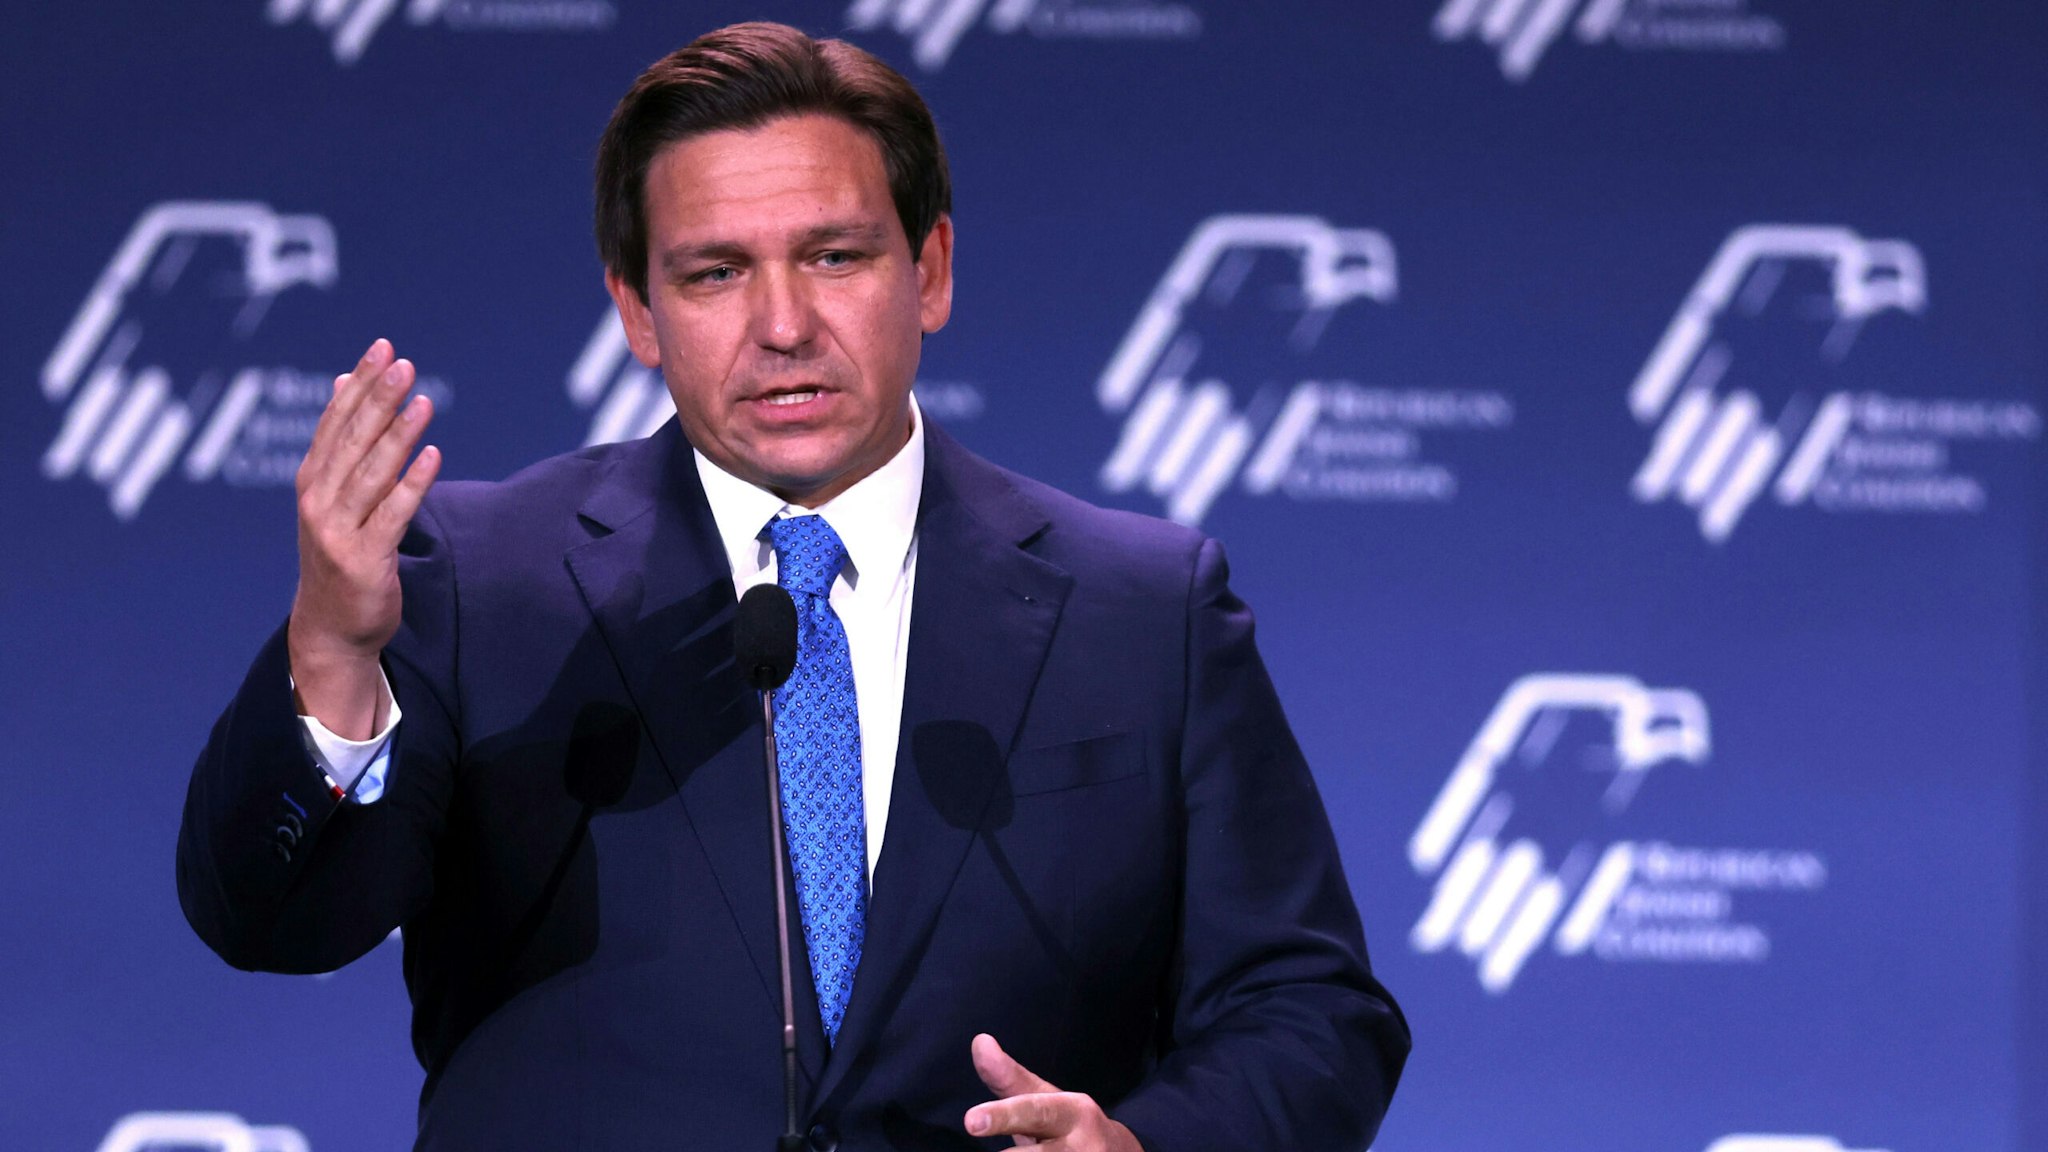 LAS VEGAS, NEVADA - NOVEMBER 18: Florida Governor Ron DeSantis speaks to guests at the Republican Jewish Coalition Annual Leadership Meeting on November 19, 2022 in Las Vegas, Nevada. The meeting comes on the heels of former President Donald Trump becoming the first candidate to declare his intention to seek the GOP nomination in the 2024 presidential race.